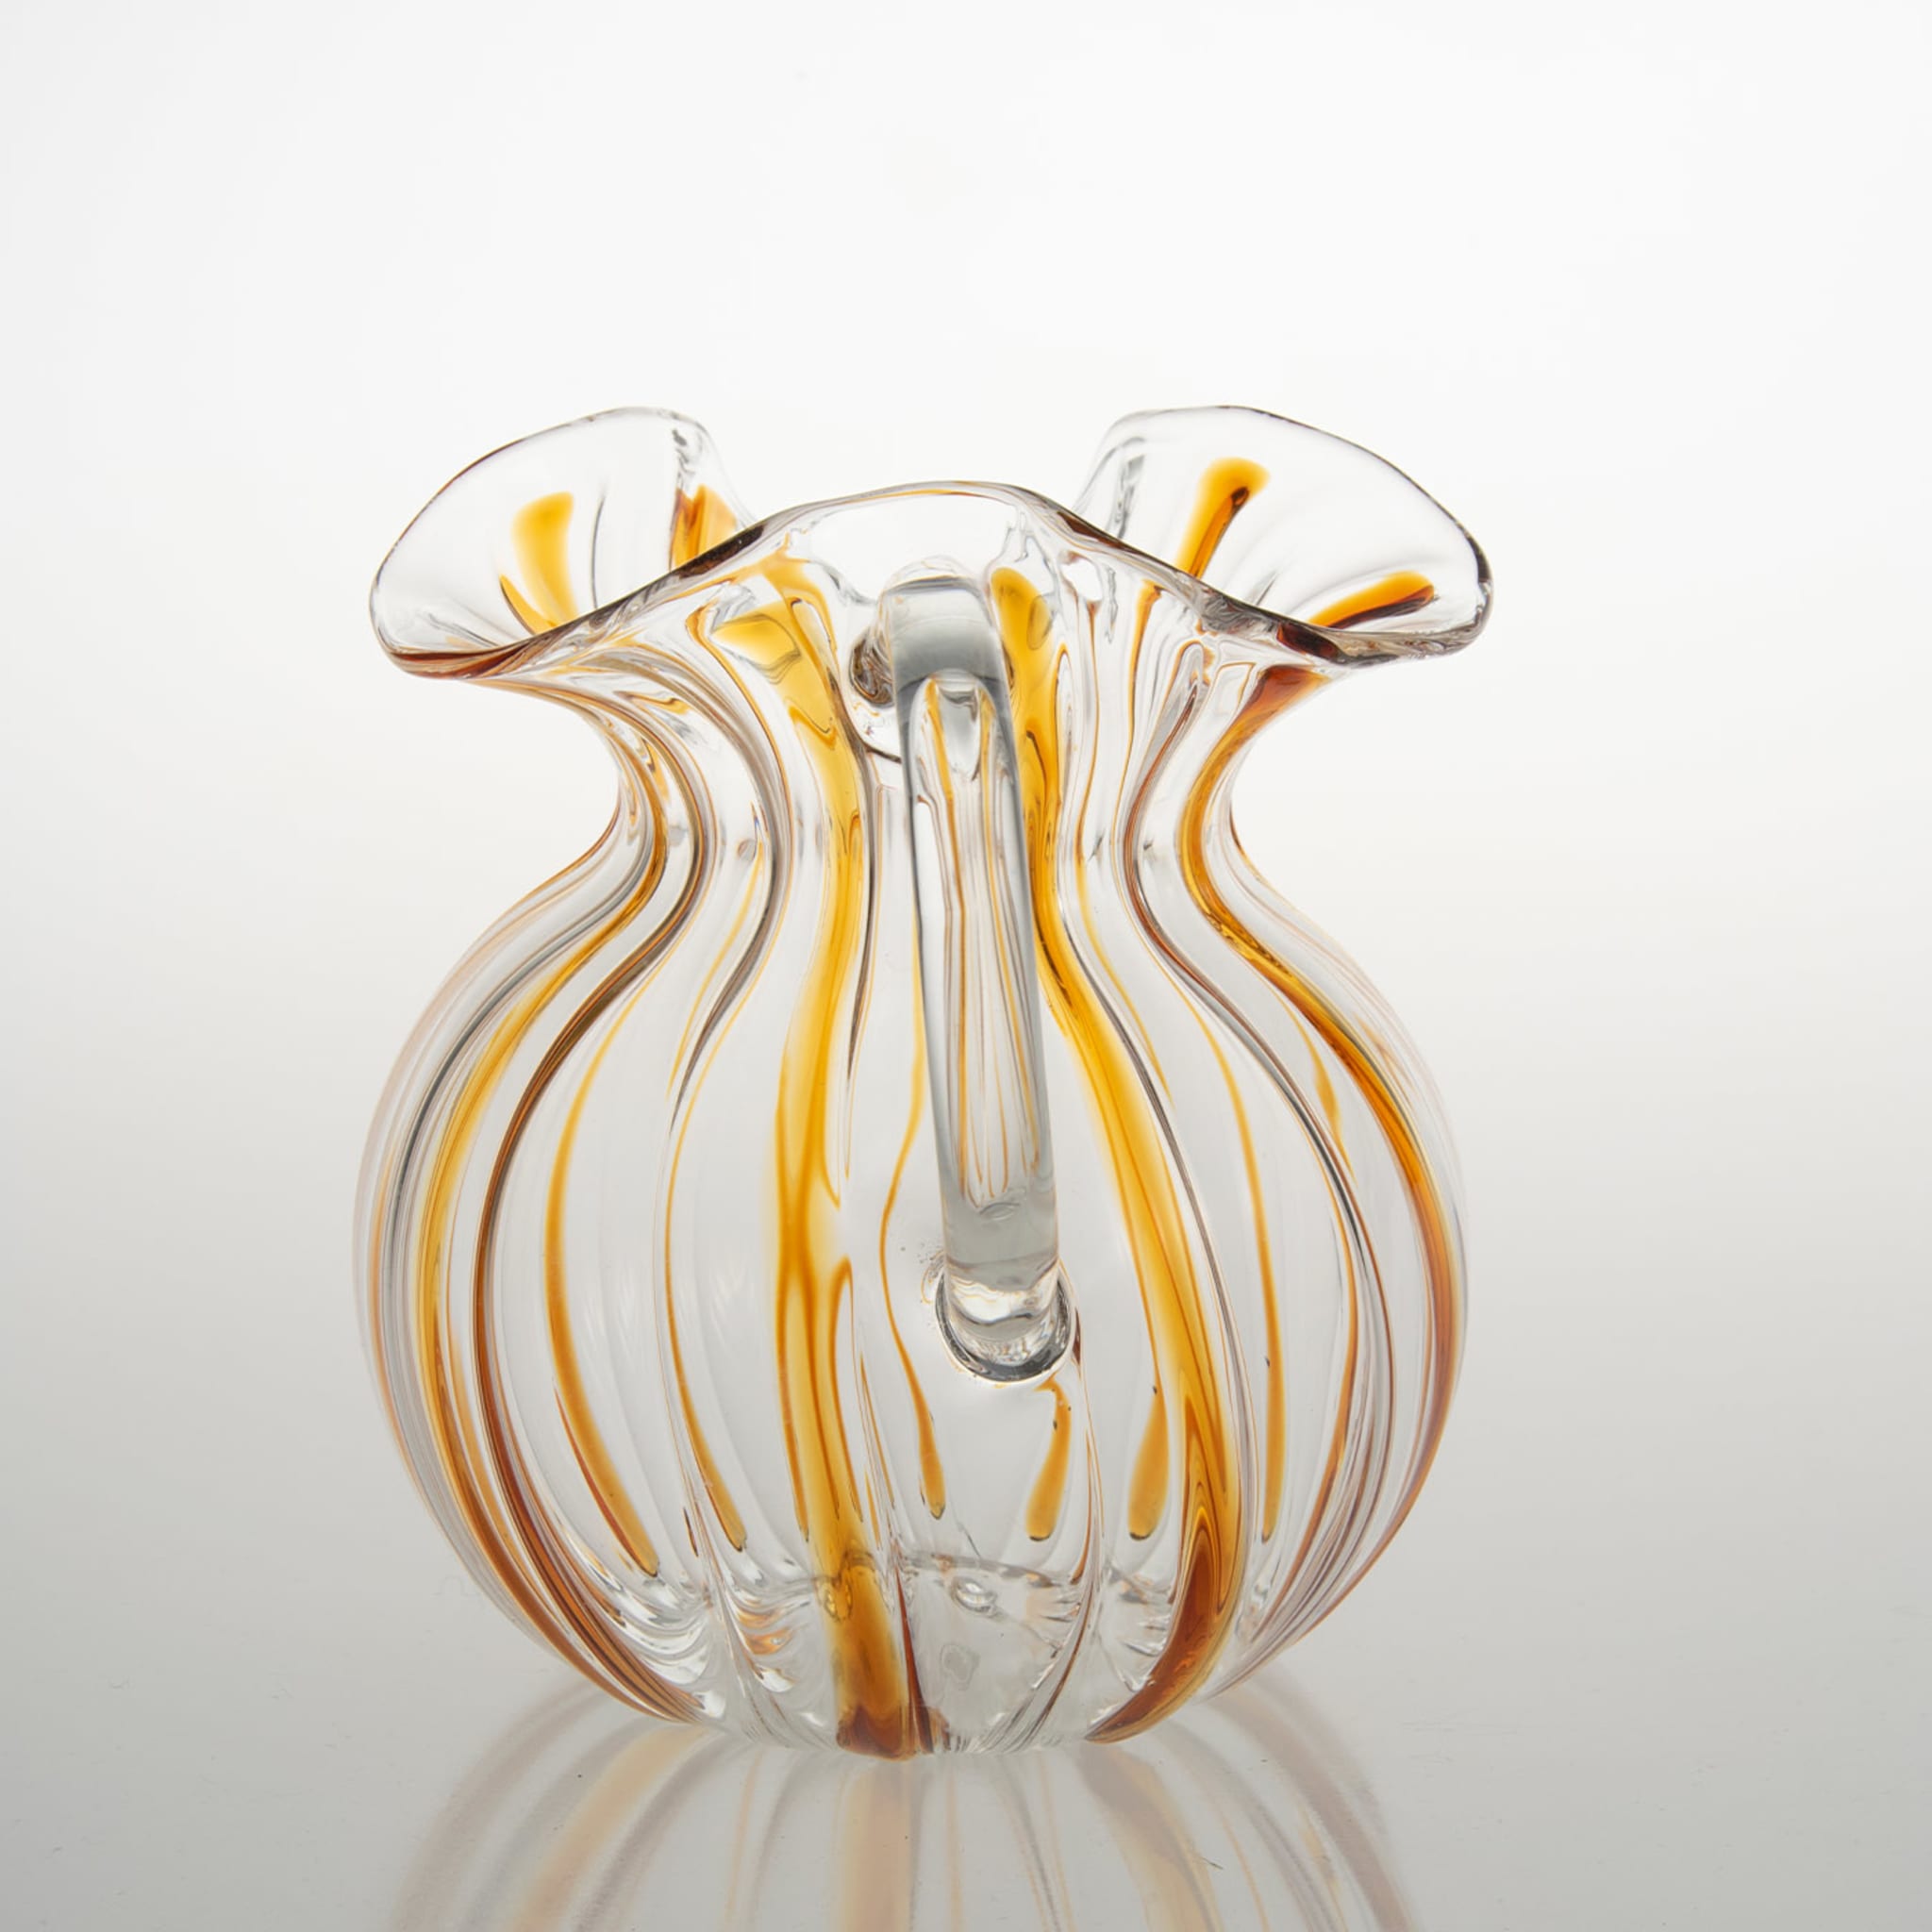 Torcello Yellow Striped Pitcher - Alternative view 3